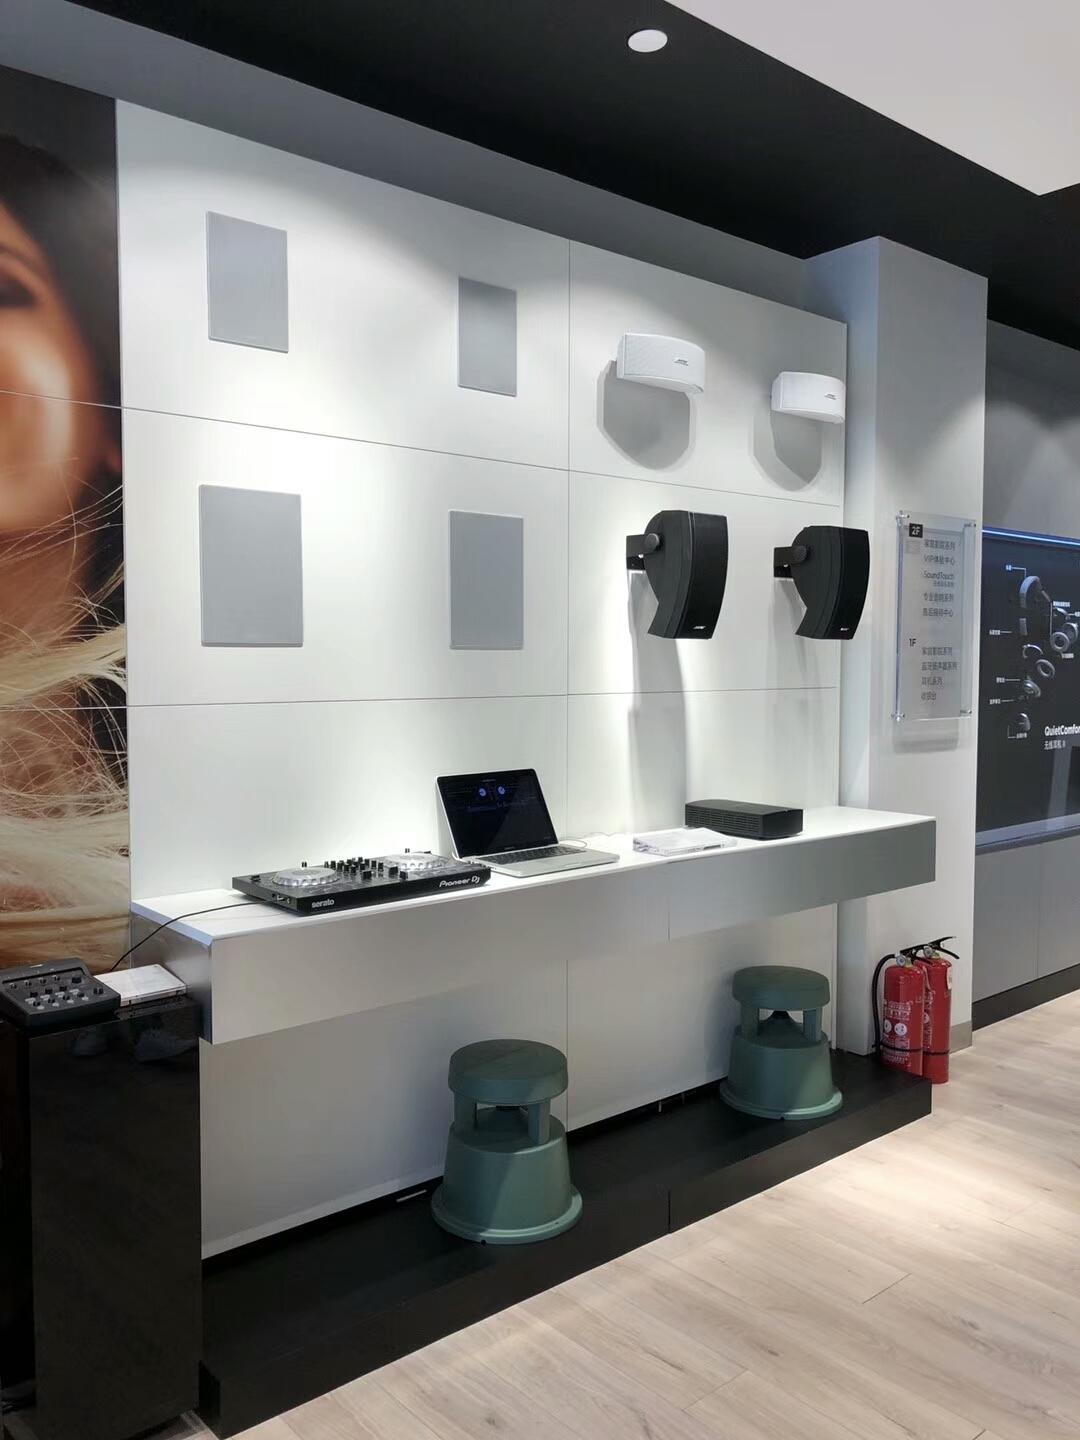 Bose Experience Store